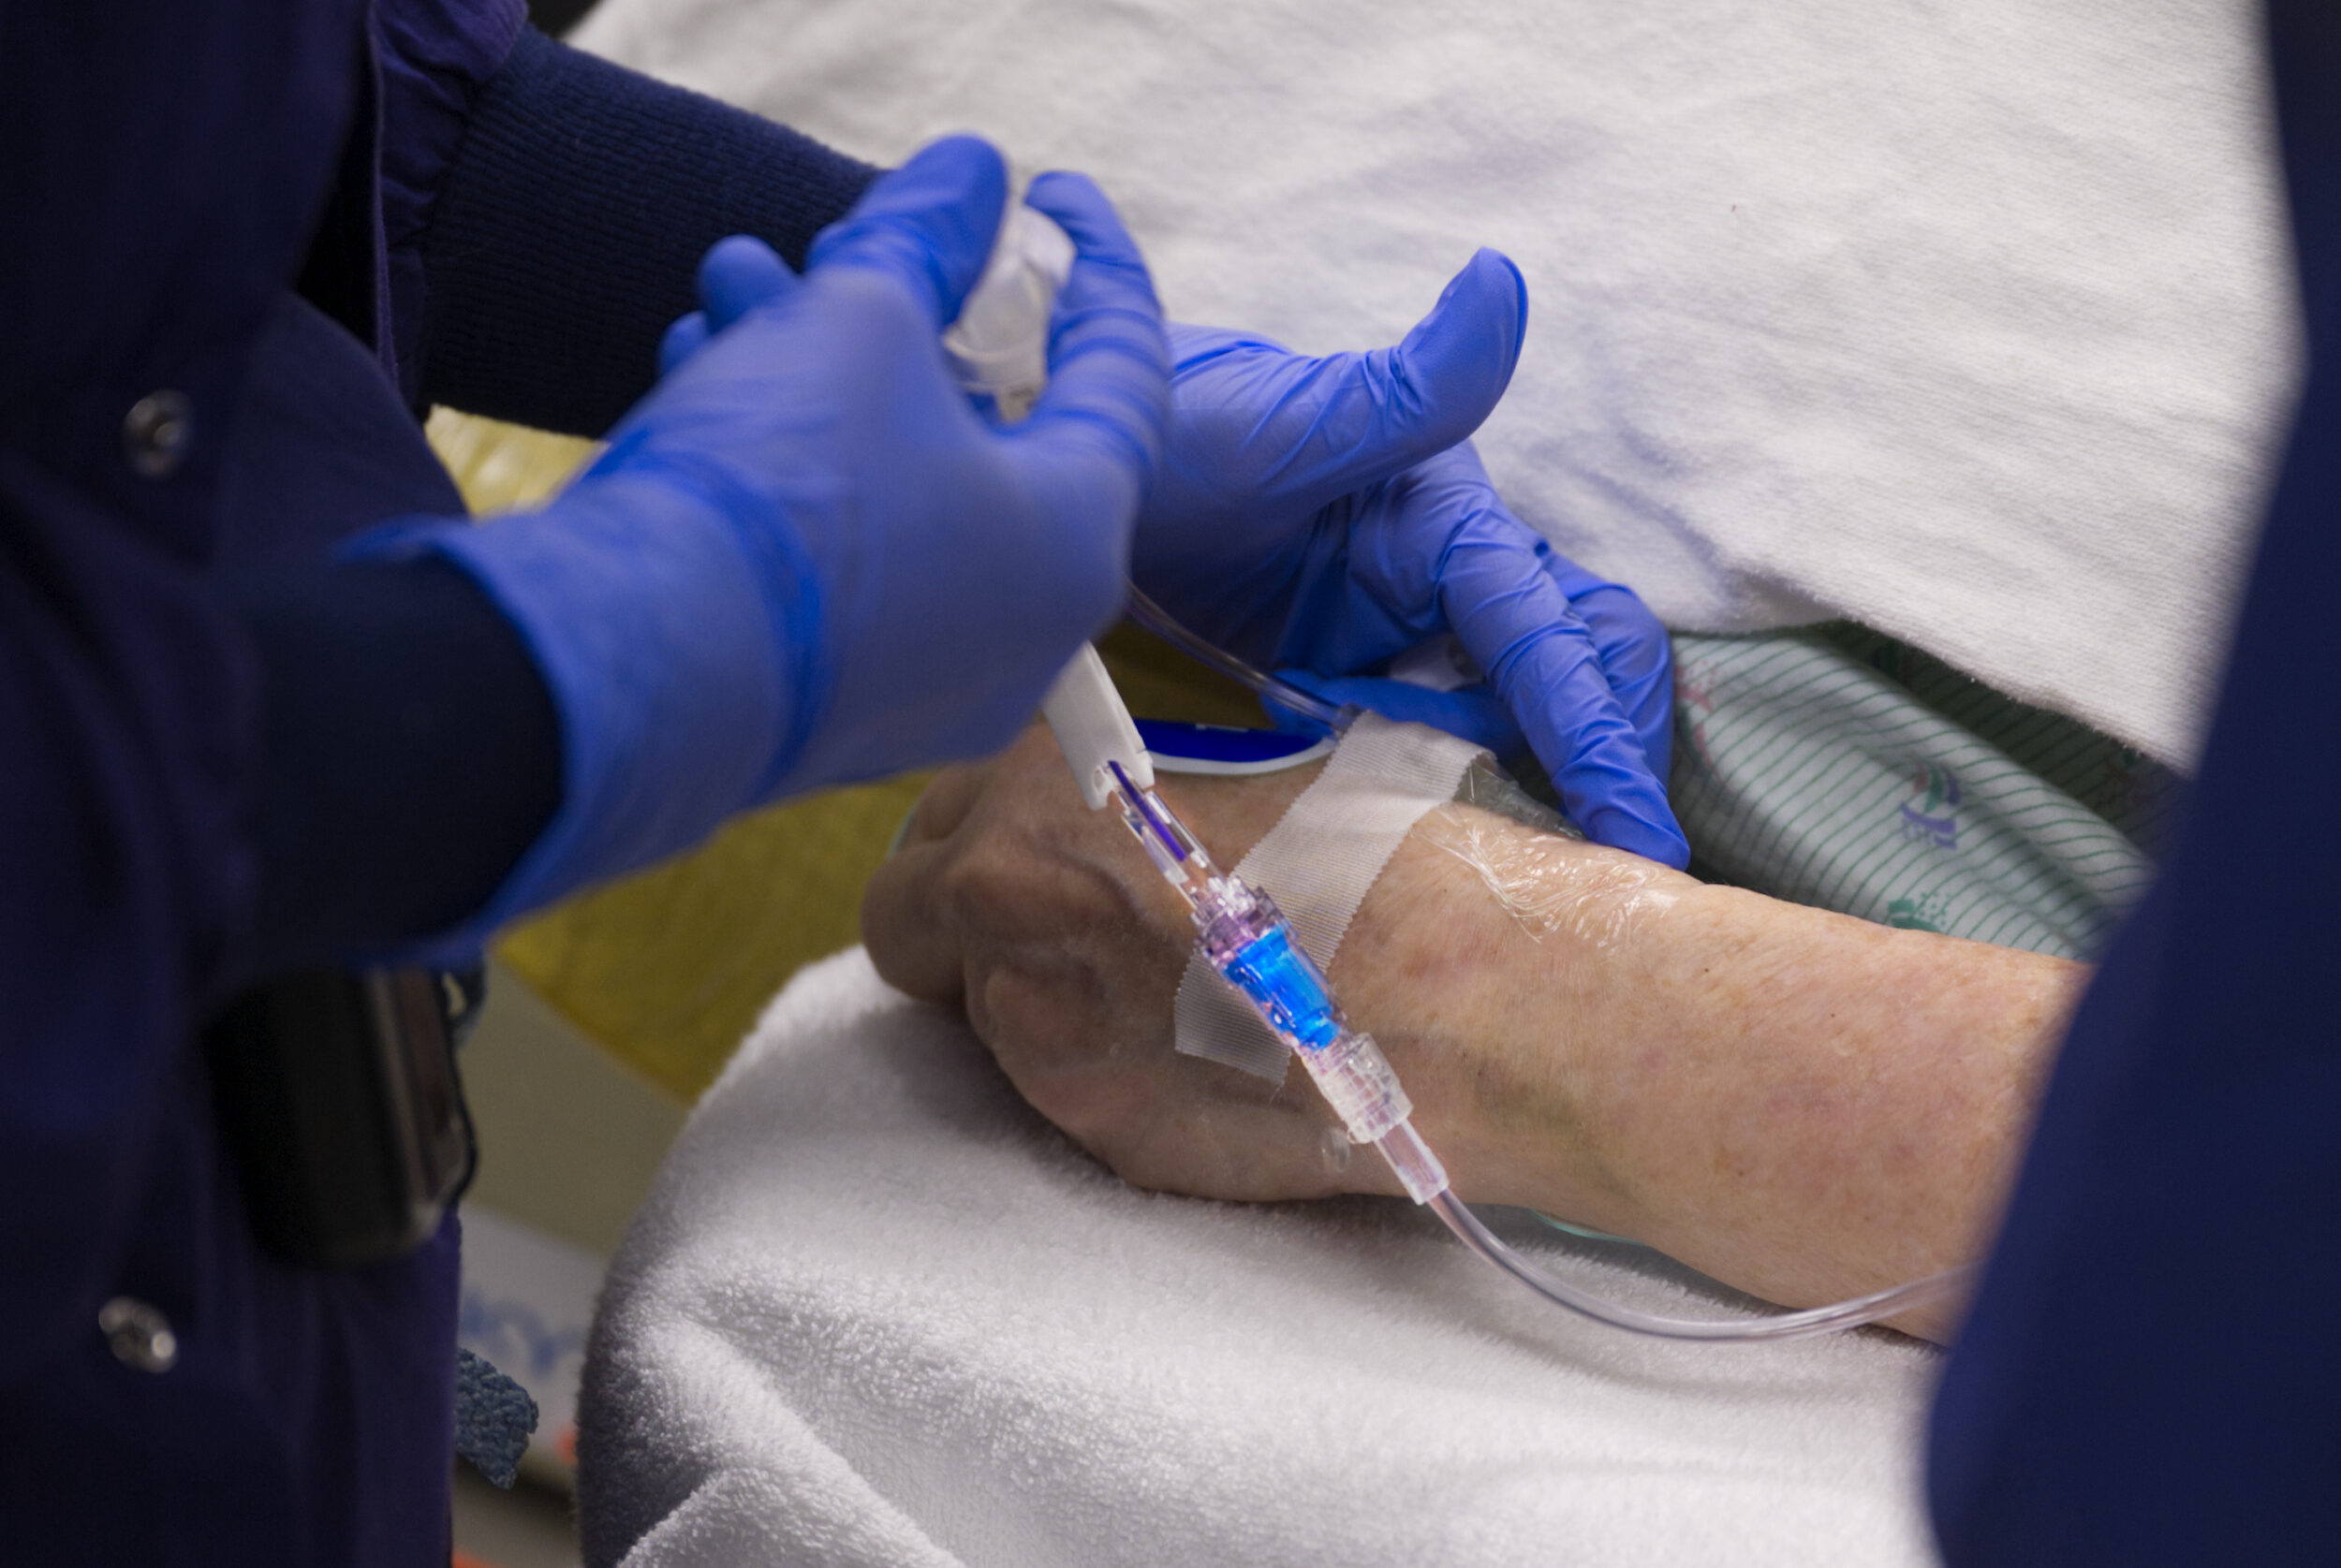 blue gloved hands holding a catheter attached to a patient's wrist